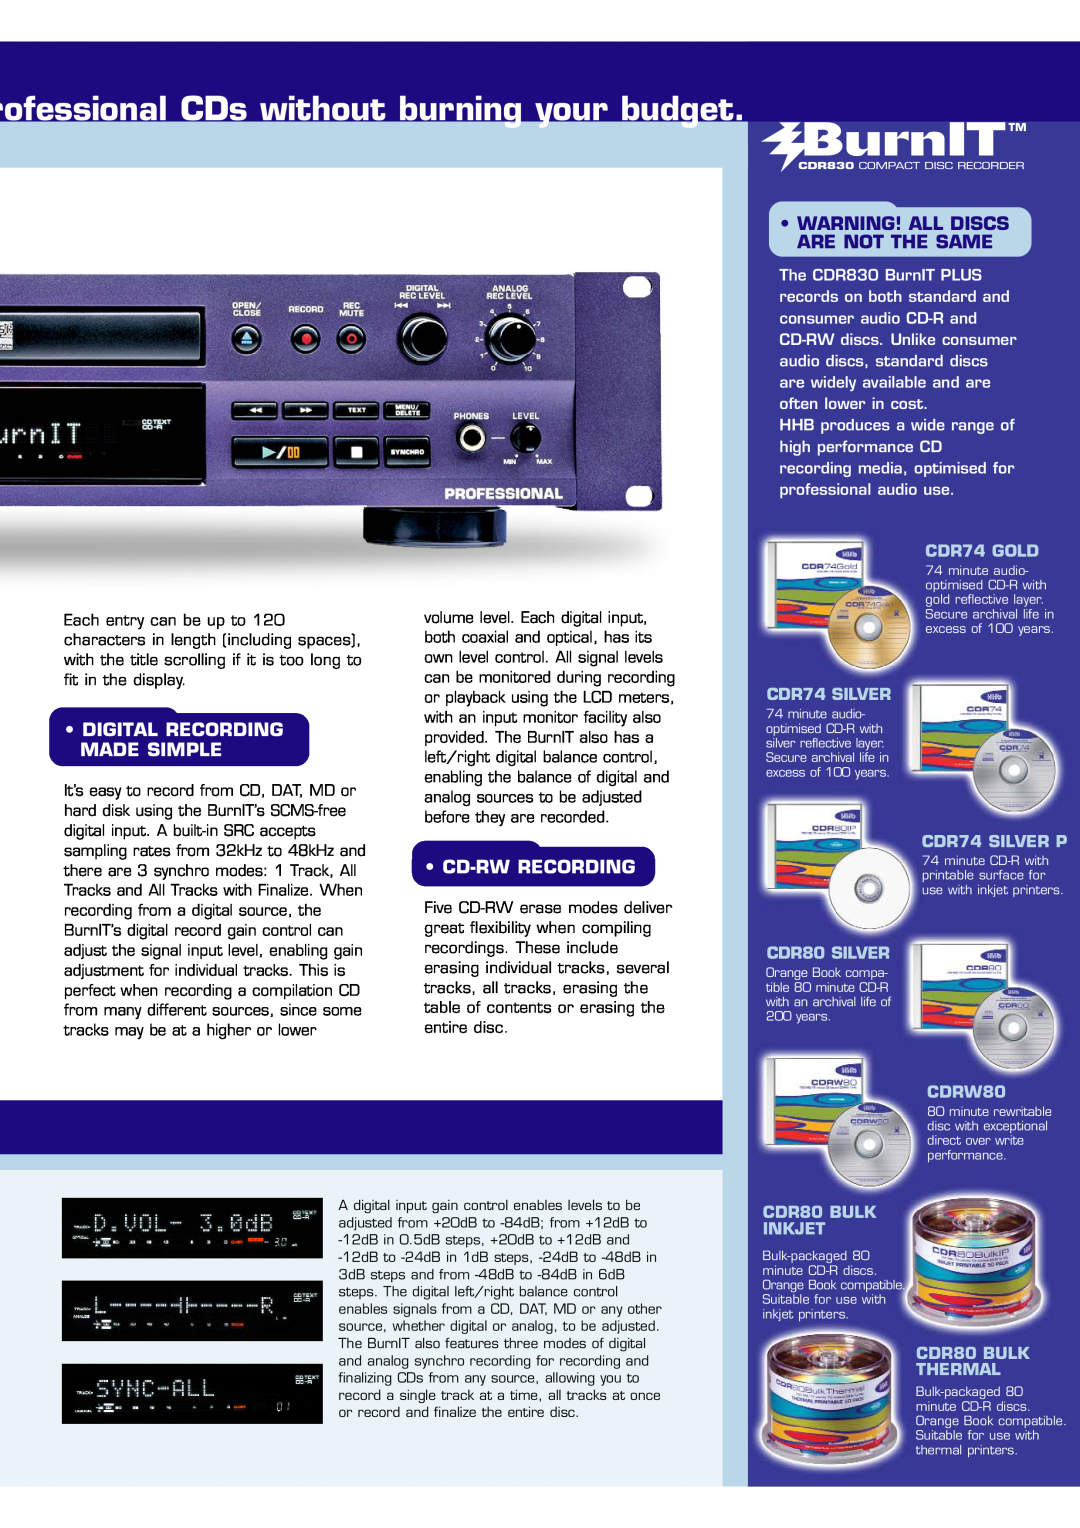 HHB comm CDR830PLUS rofessional CDs without burning your budget, Digital Recording Made Simple, Cd-Rwrecording, CDR74 GOLD 